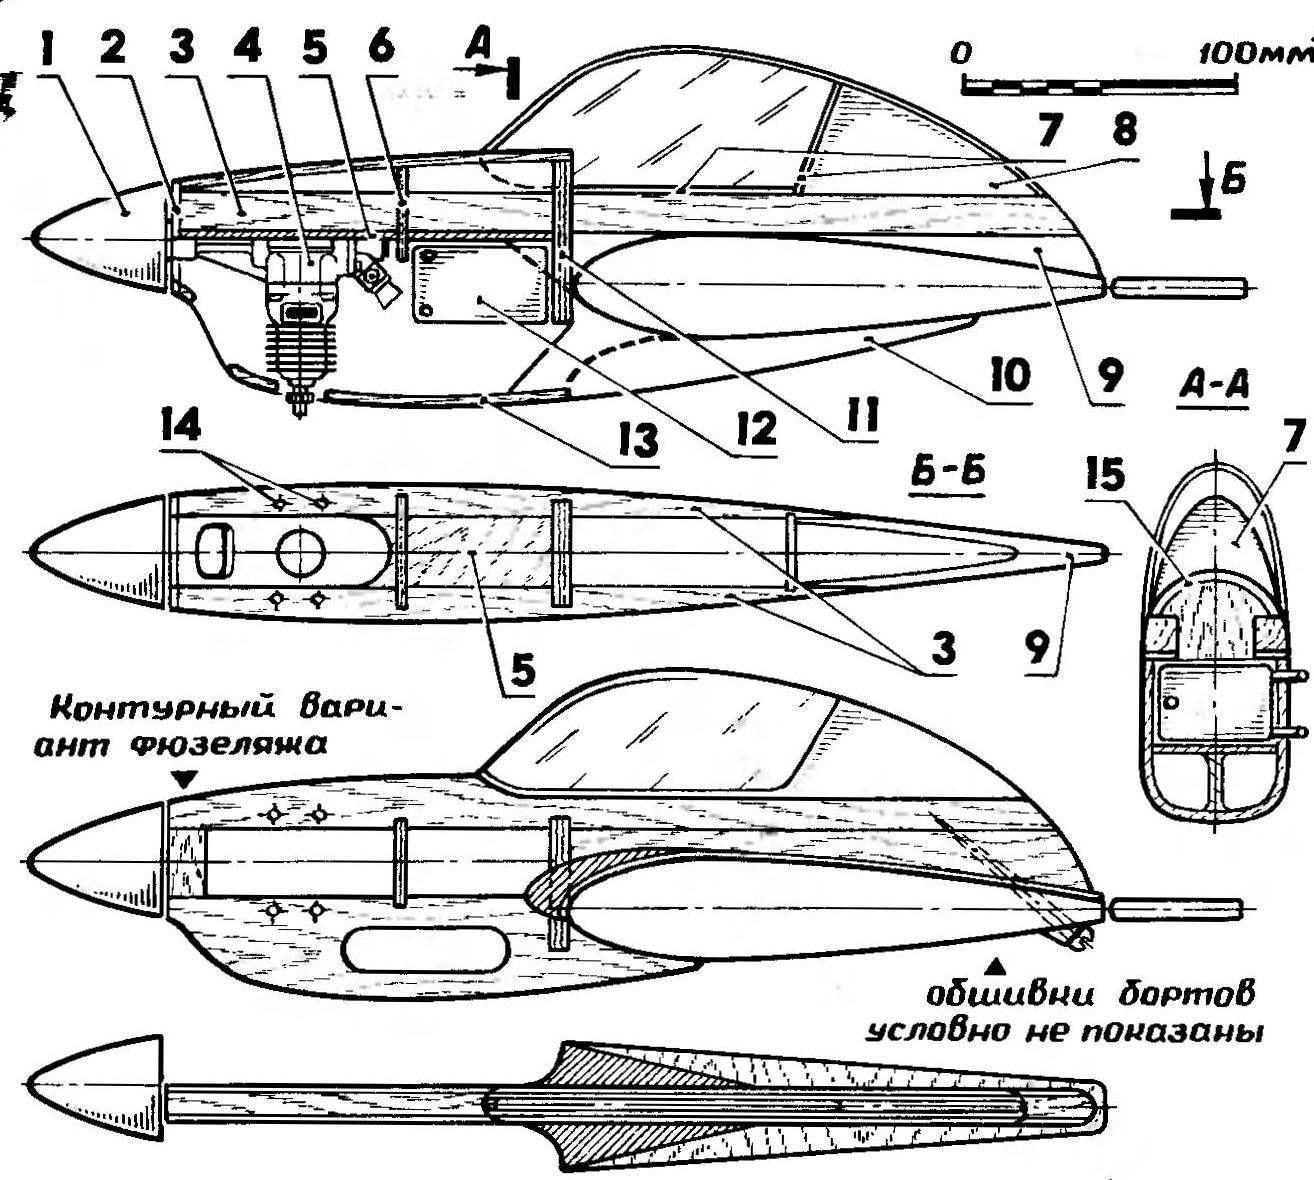 Fig. 2. The fuselage